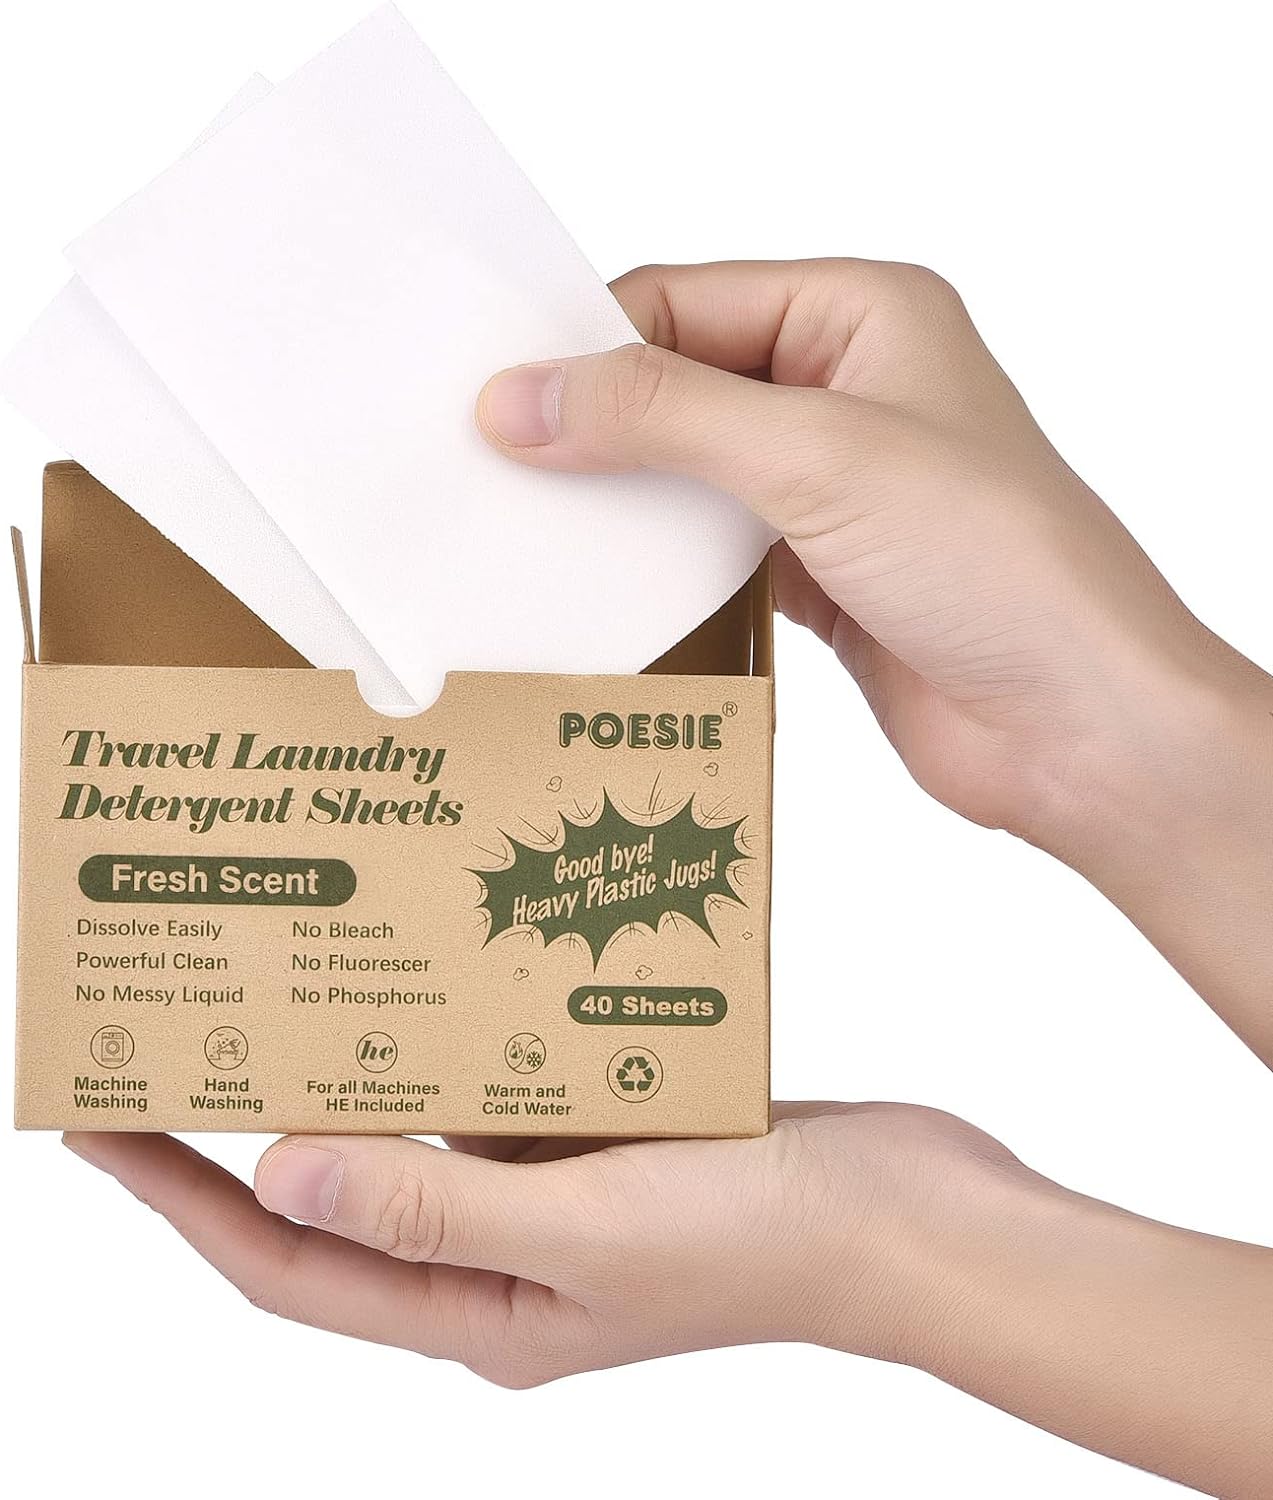 Poesie Laundry Detergent Sheets Washer Sheets for Travel Laundry Soap Sheets for Camping Hotel Dorm Home Laundromat College Fresh Scent 1 Box 40 Sheets